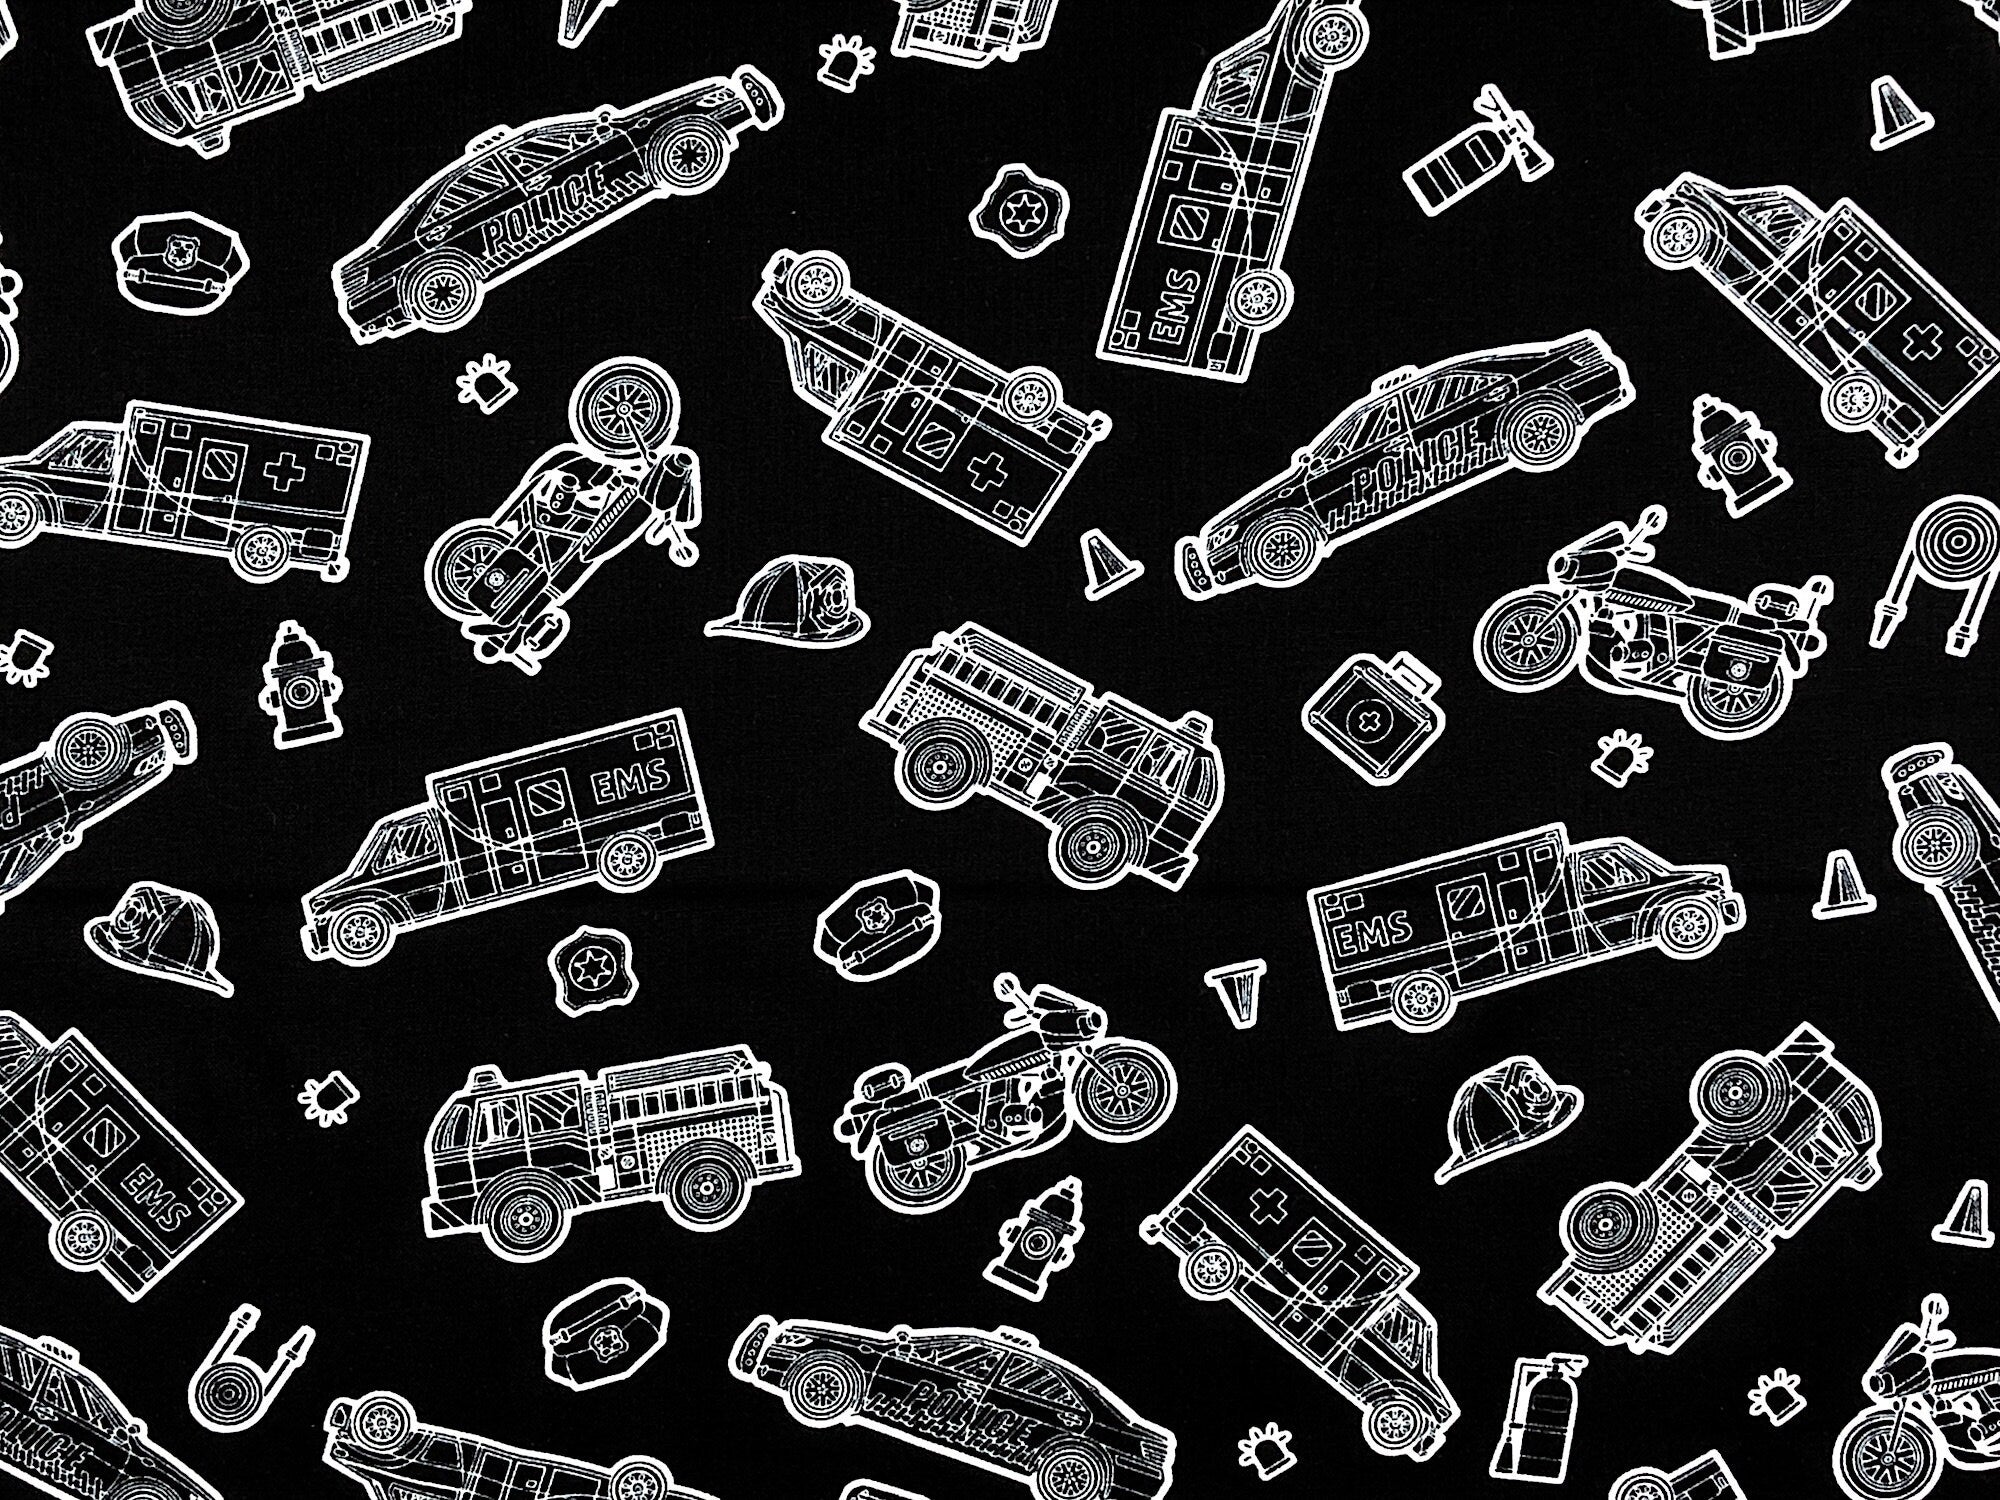 Glowing Rescue Vehicle Fabric - Transportation Fabric - Cotton Fabric - TRANS-11